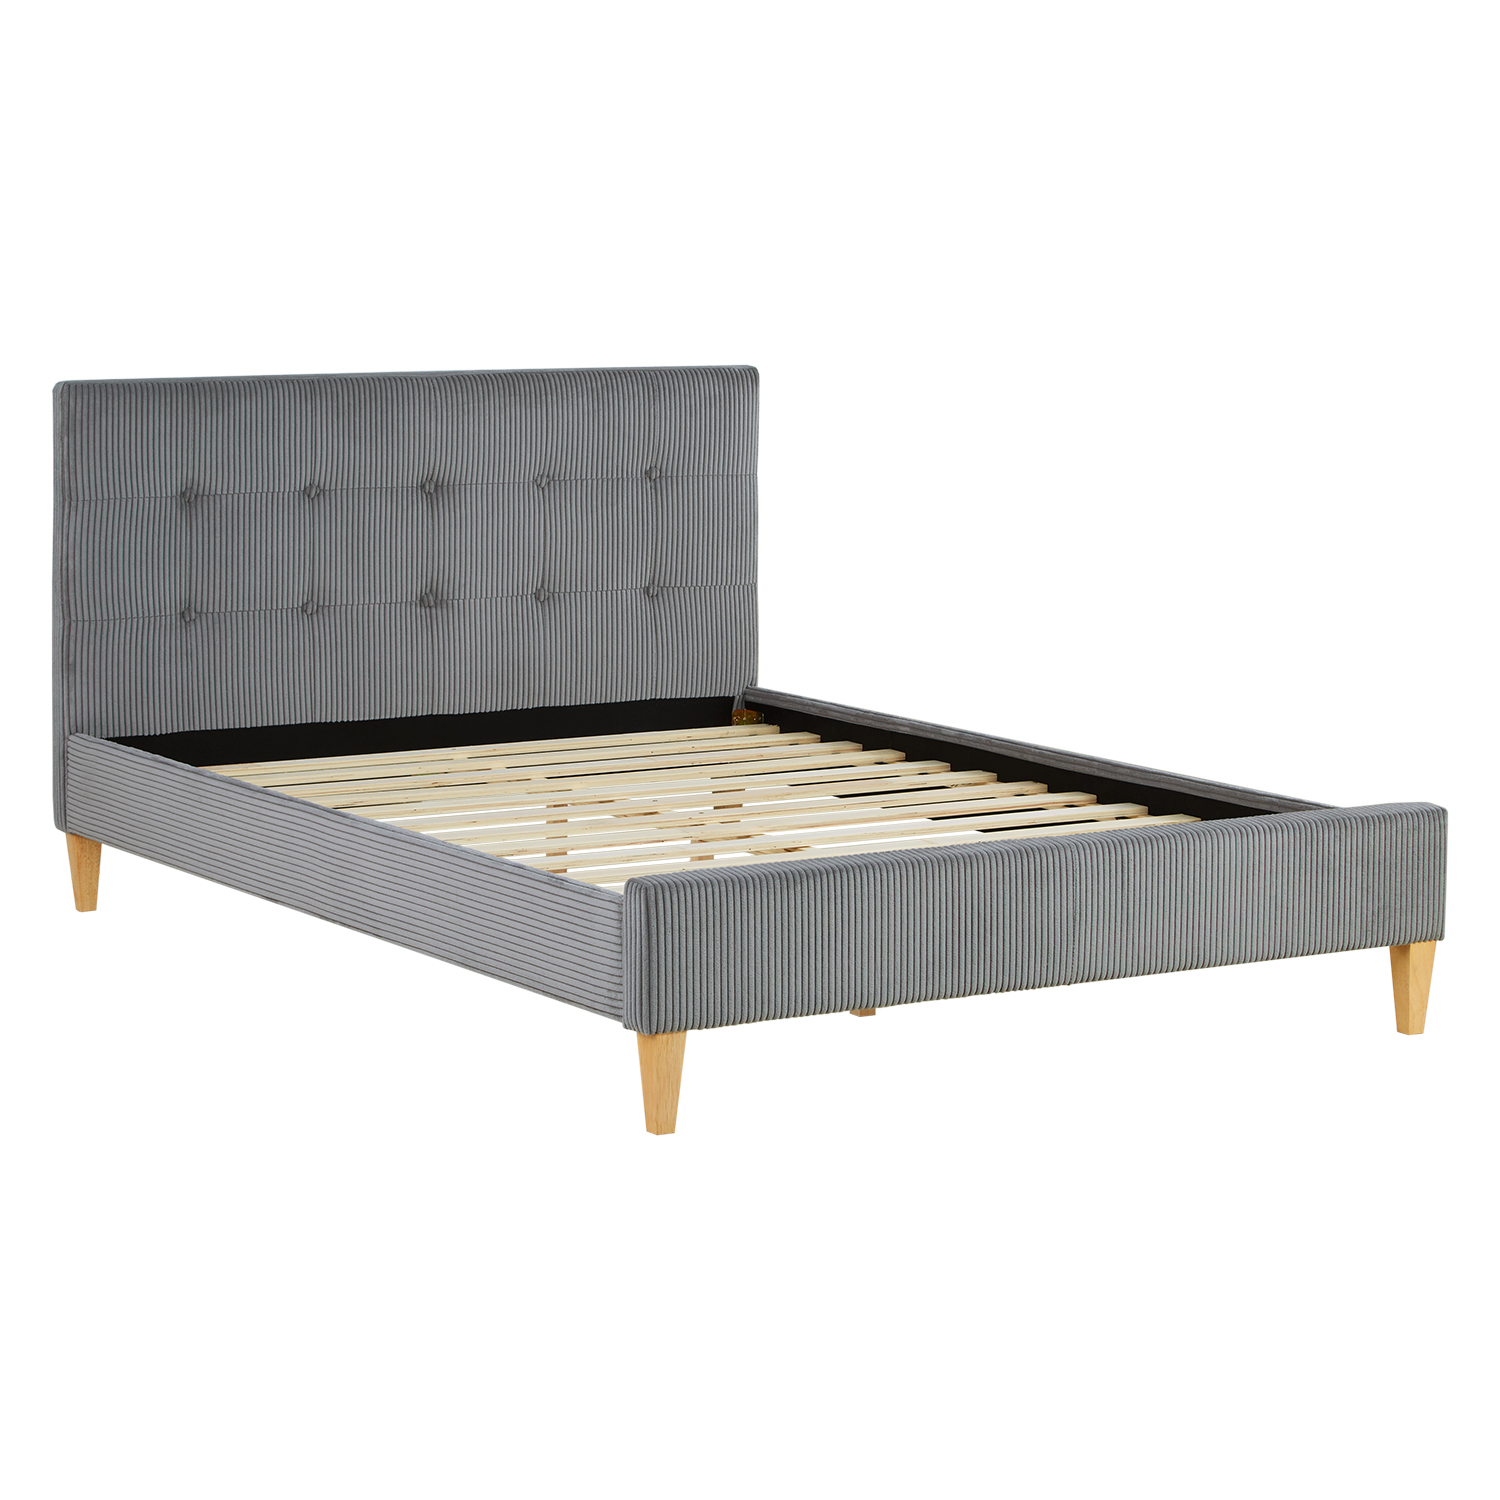 Small Double Bed 140x200 cm Grey Cord Upholstered Bed with Slatted Frame Fabric Bed Frame